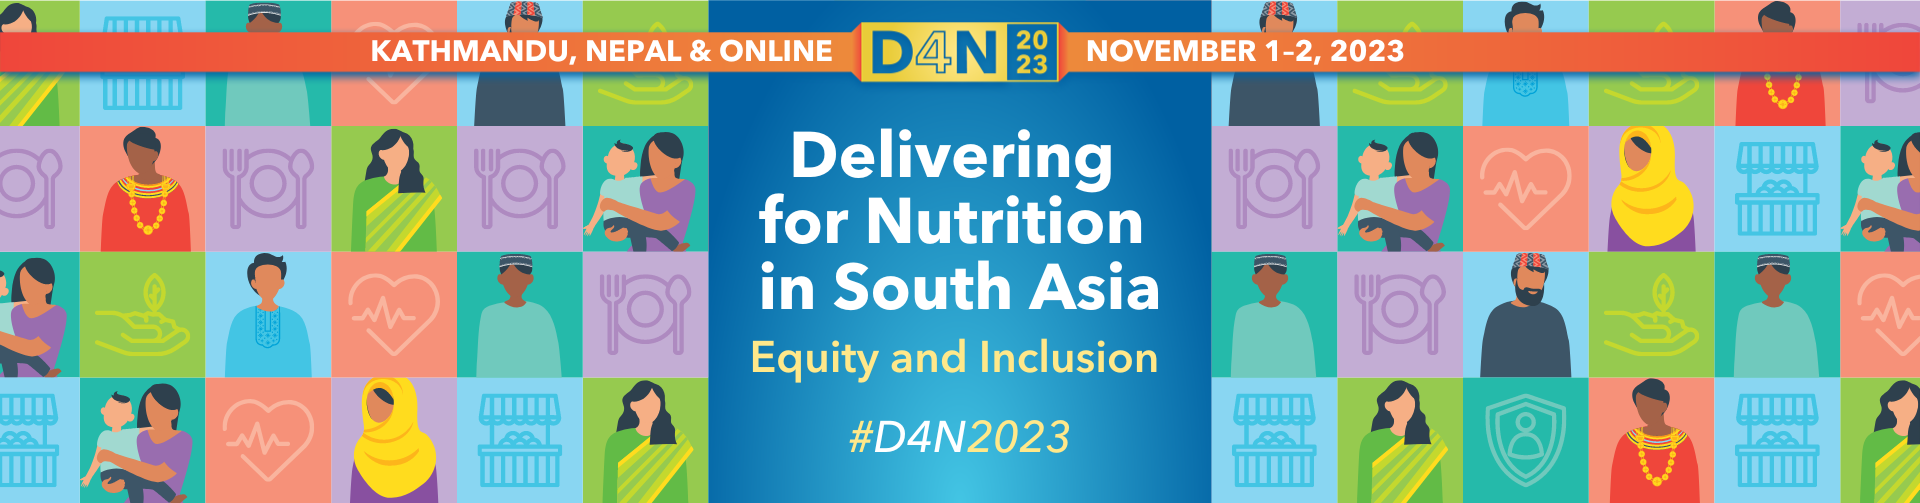 Delivering for Nutrition in South Asia: Poster Presentation